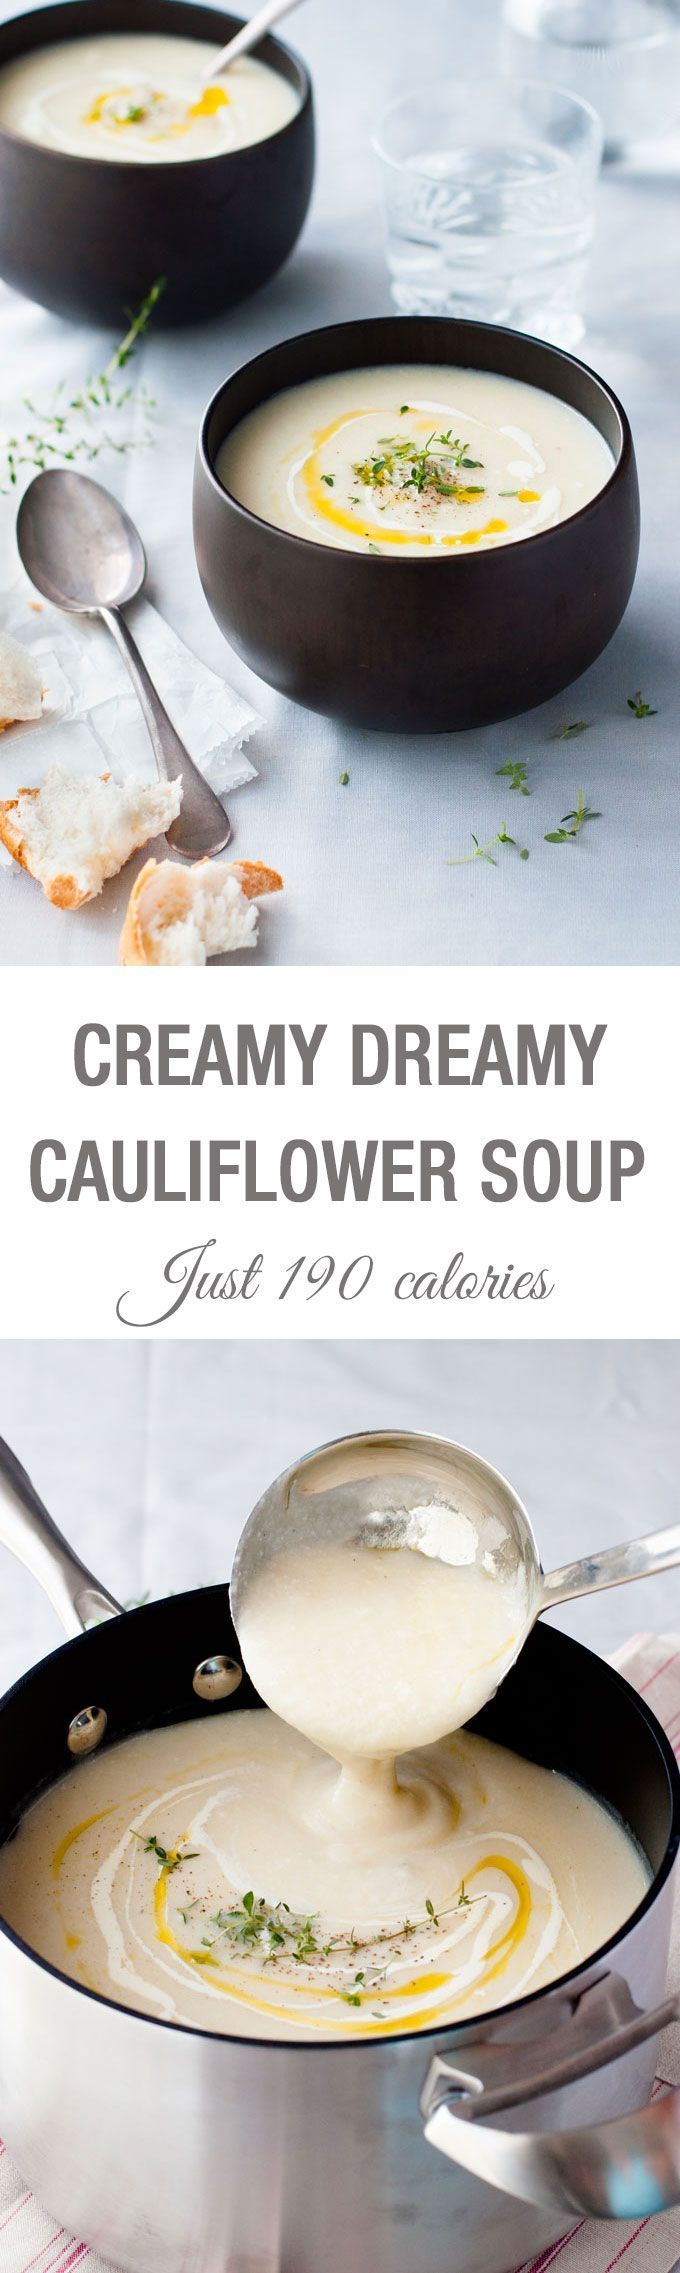 Creamy Dreamy Cauliflower Soup – just 190 calories for a BIG bowl, effortless to make and soooo creamy!